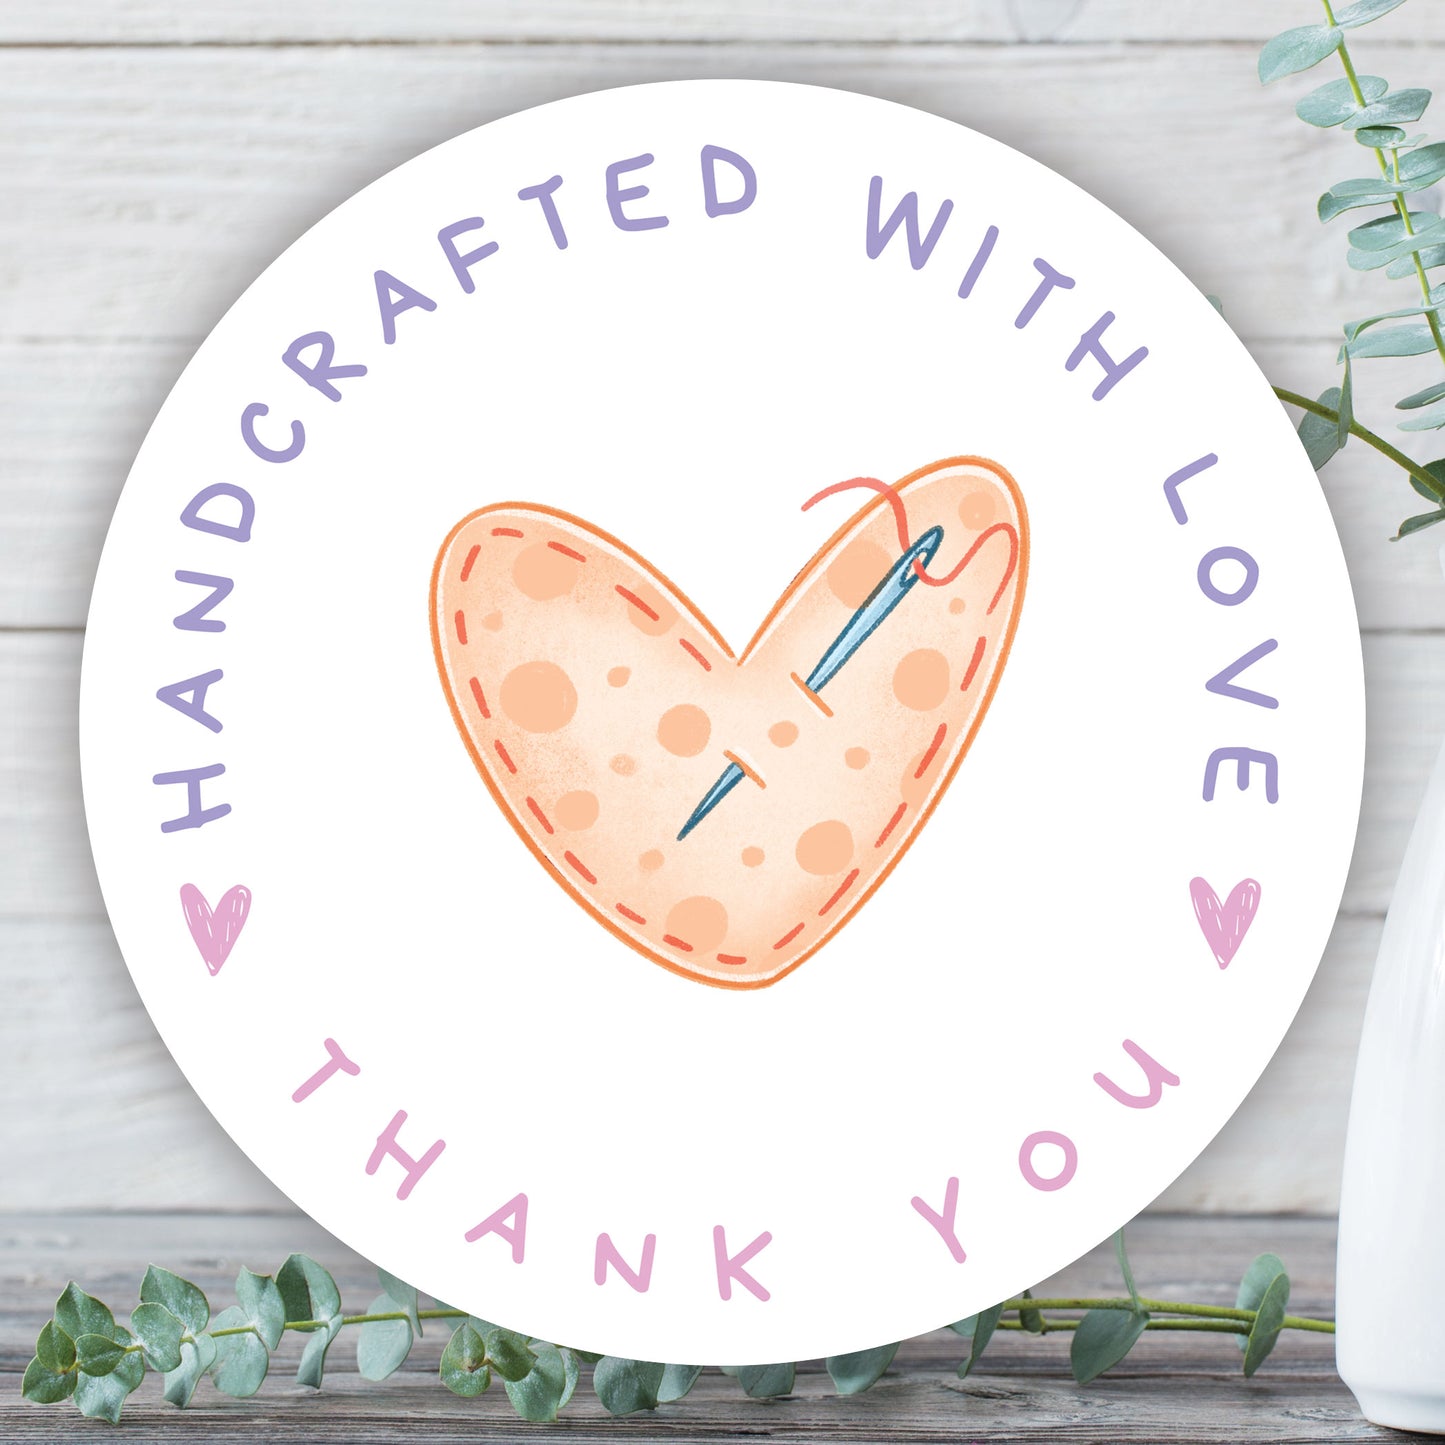 Handcrafted With Love Sticker